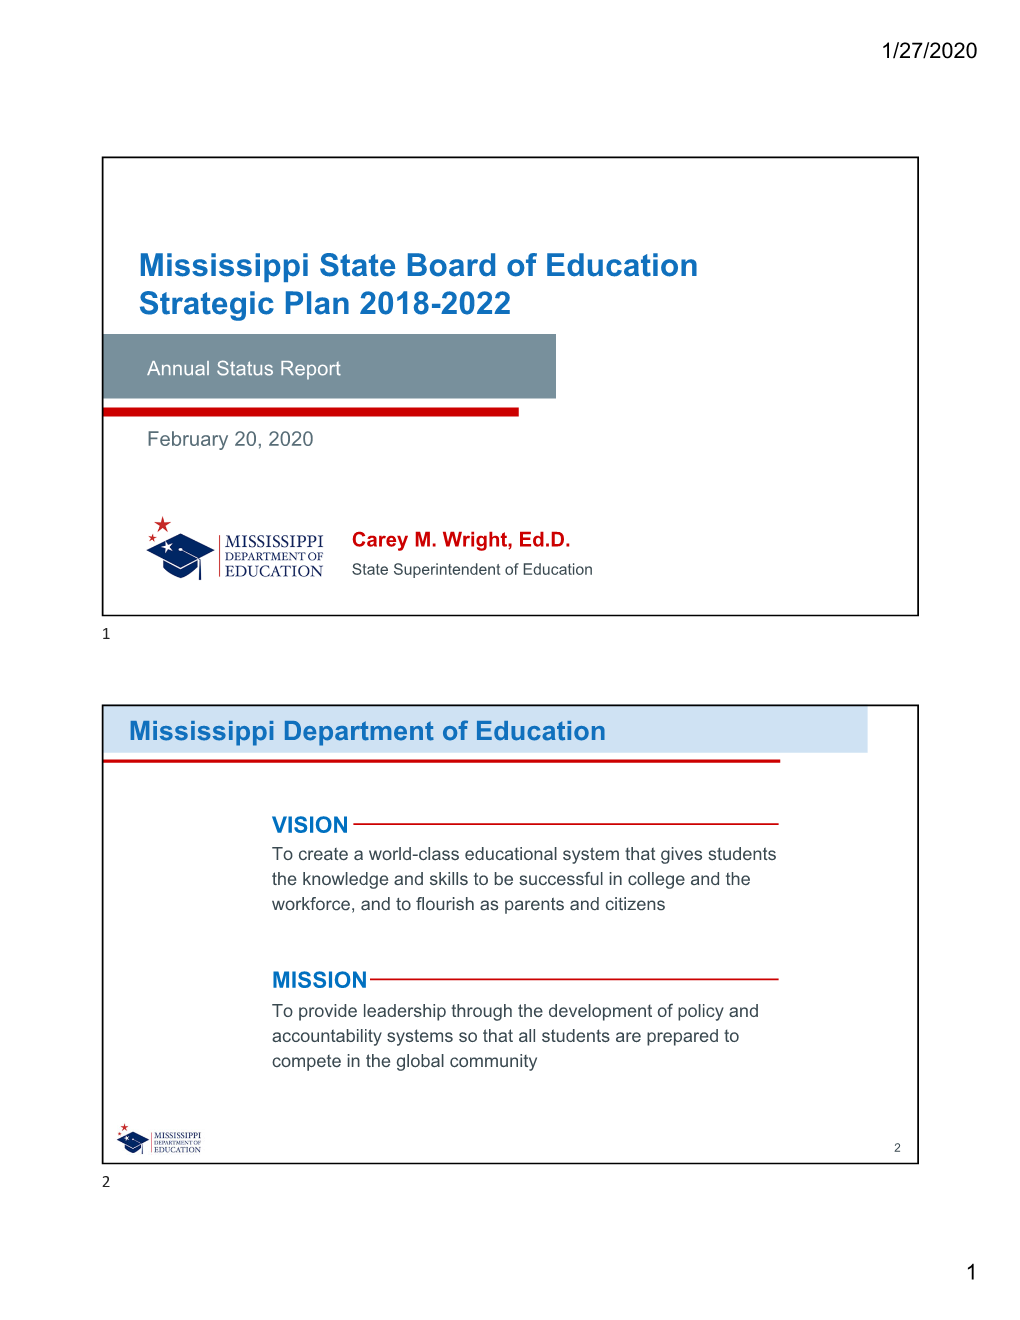 Mississippi State Board of Education Strategic Plan 2018-2022